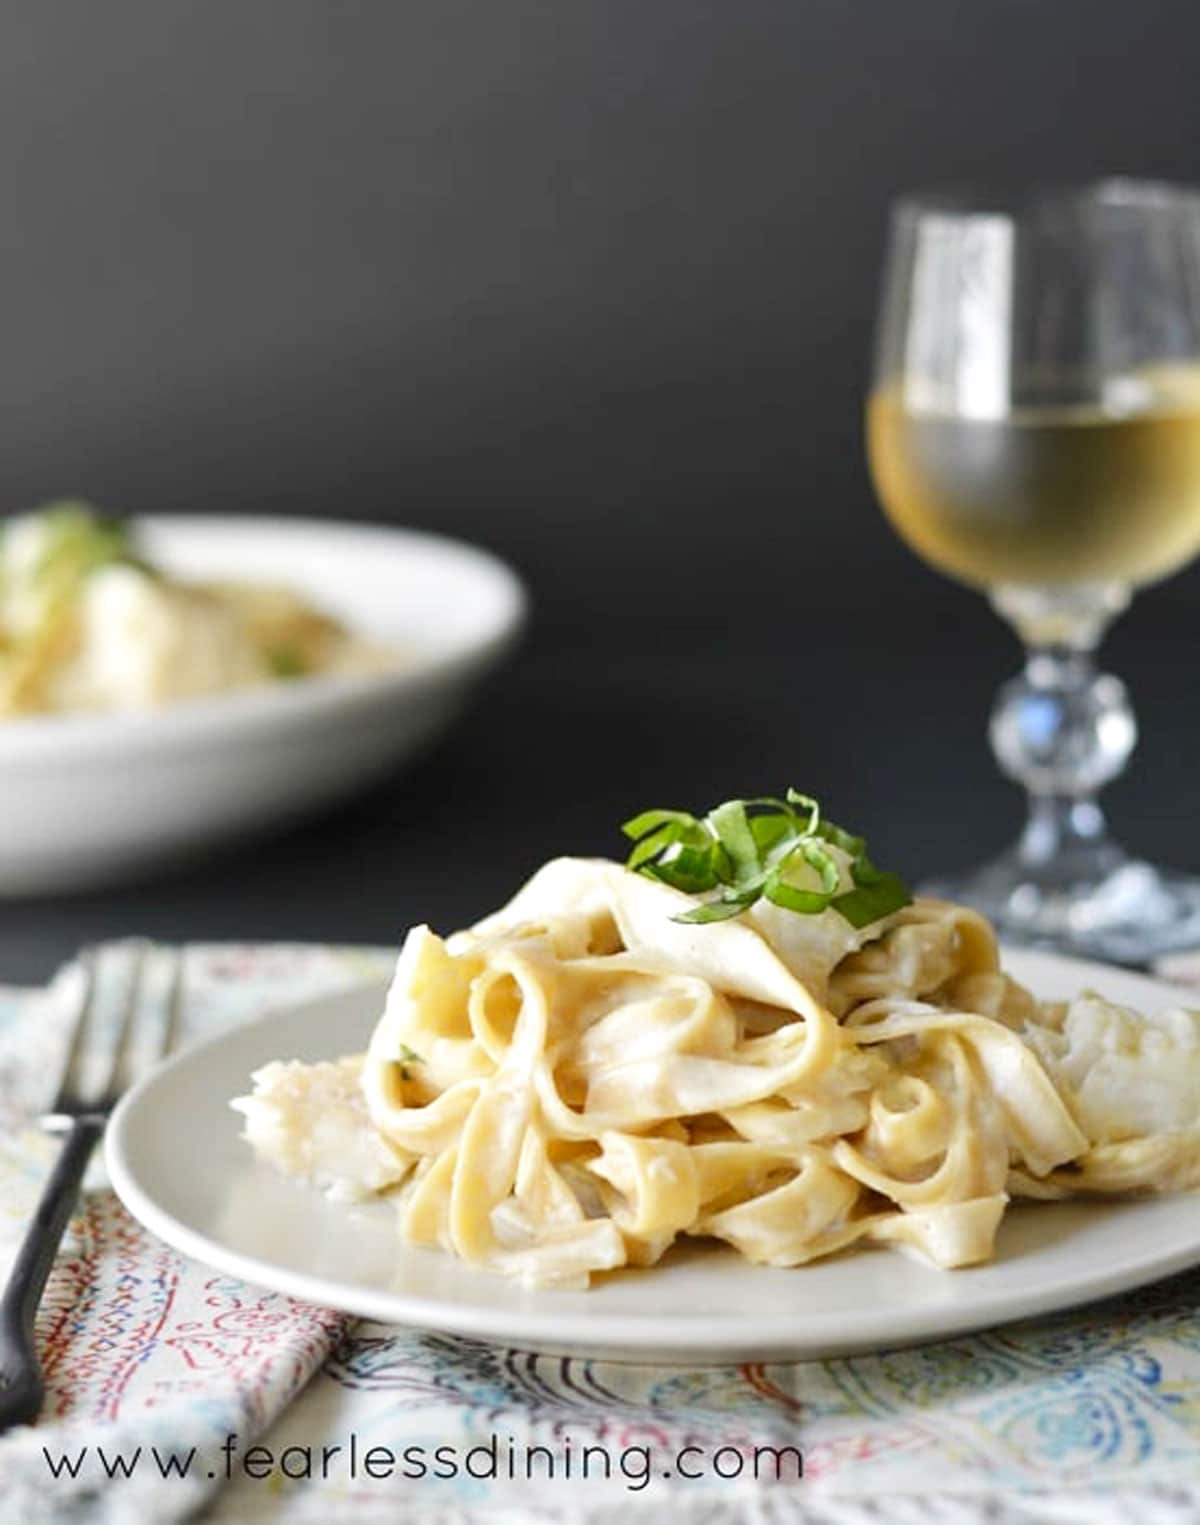 A plate full of cod fettuccine alfredo next to a glass of white wine.